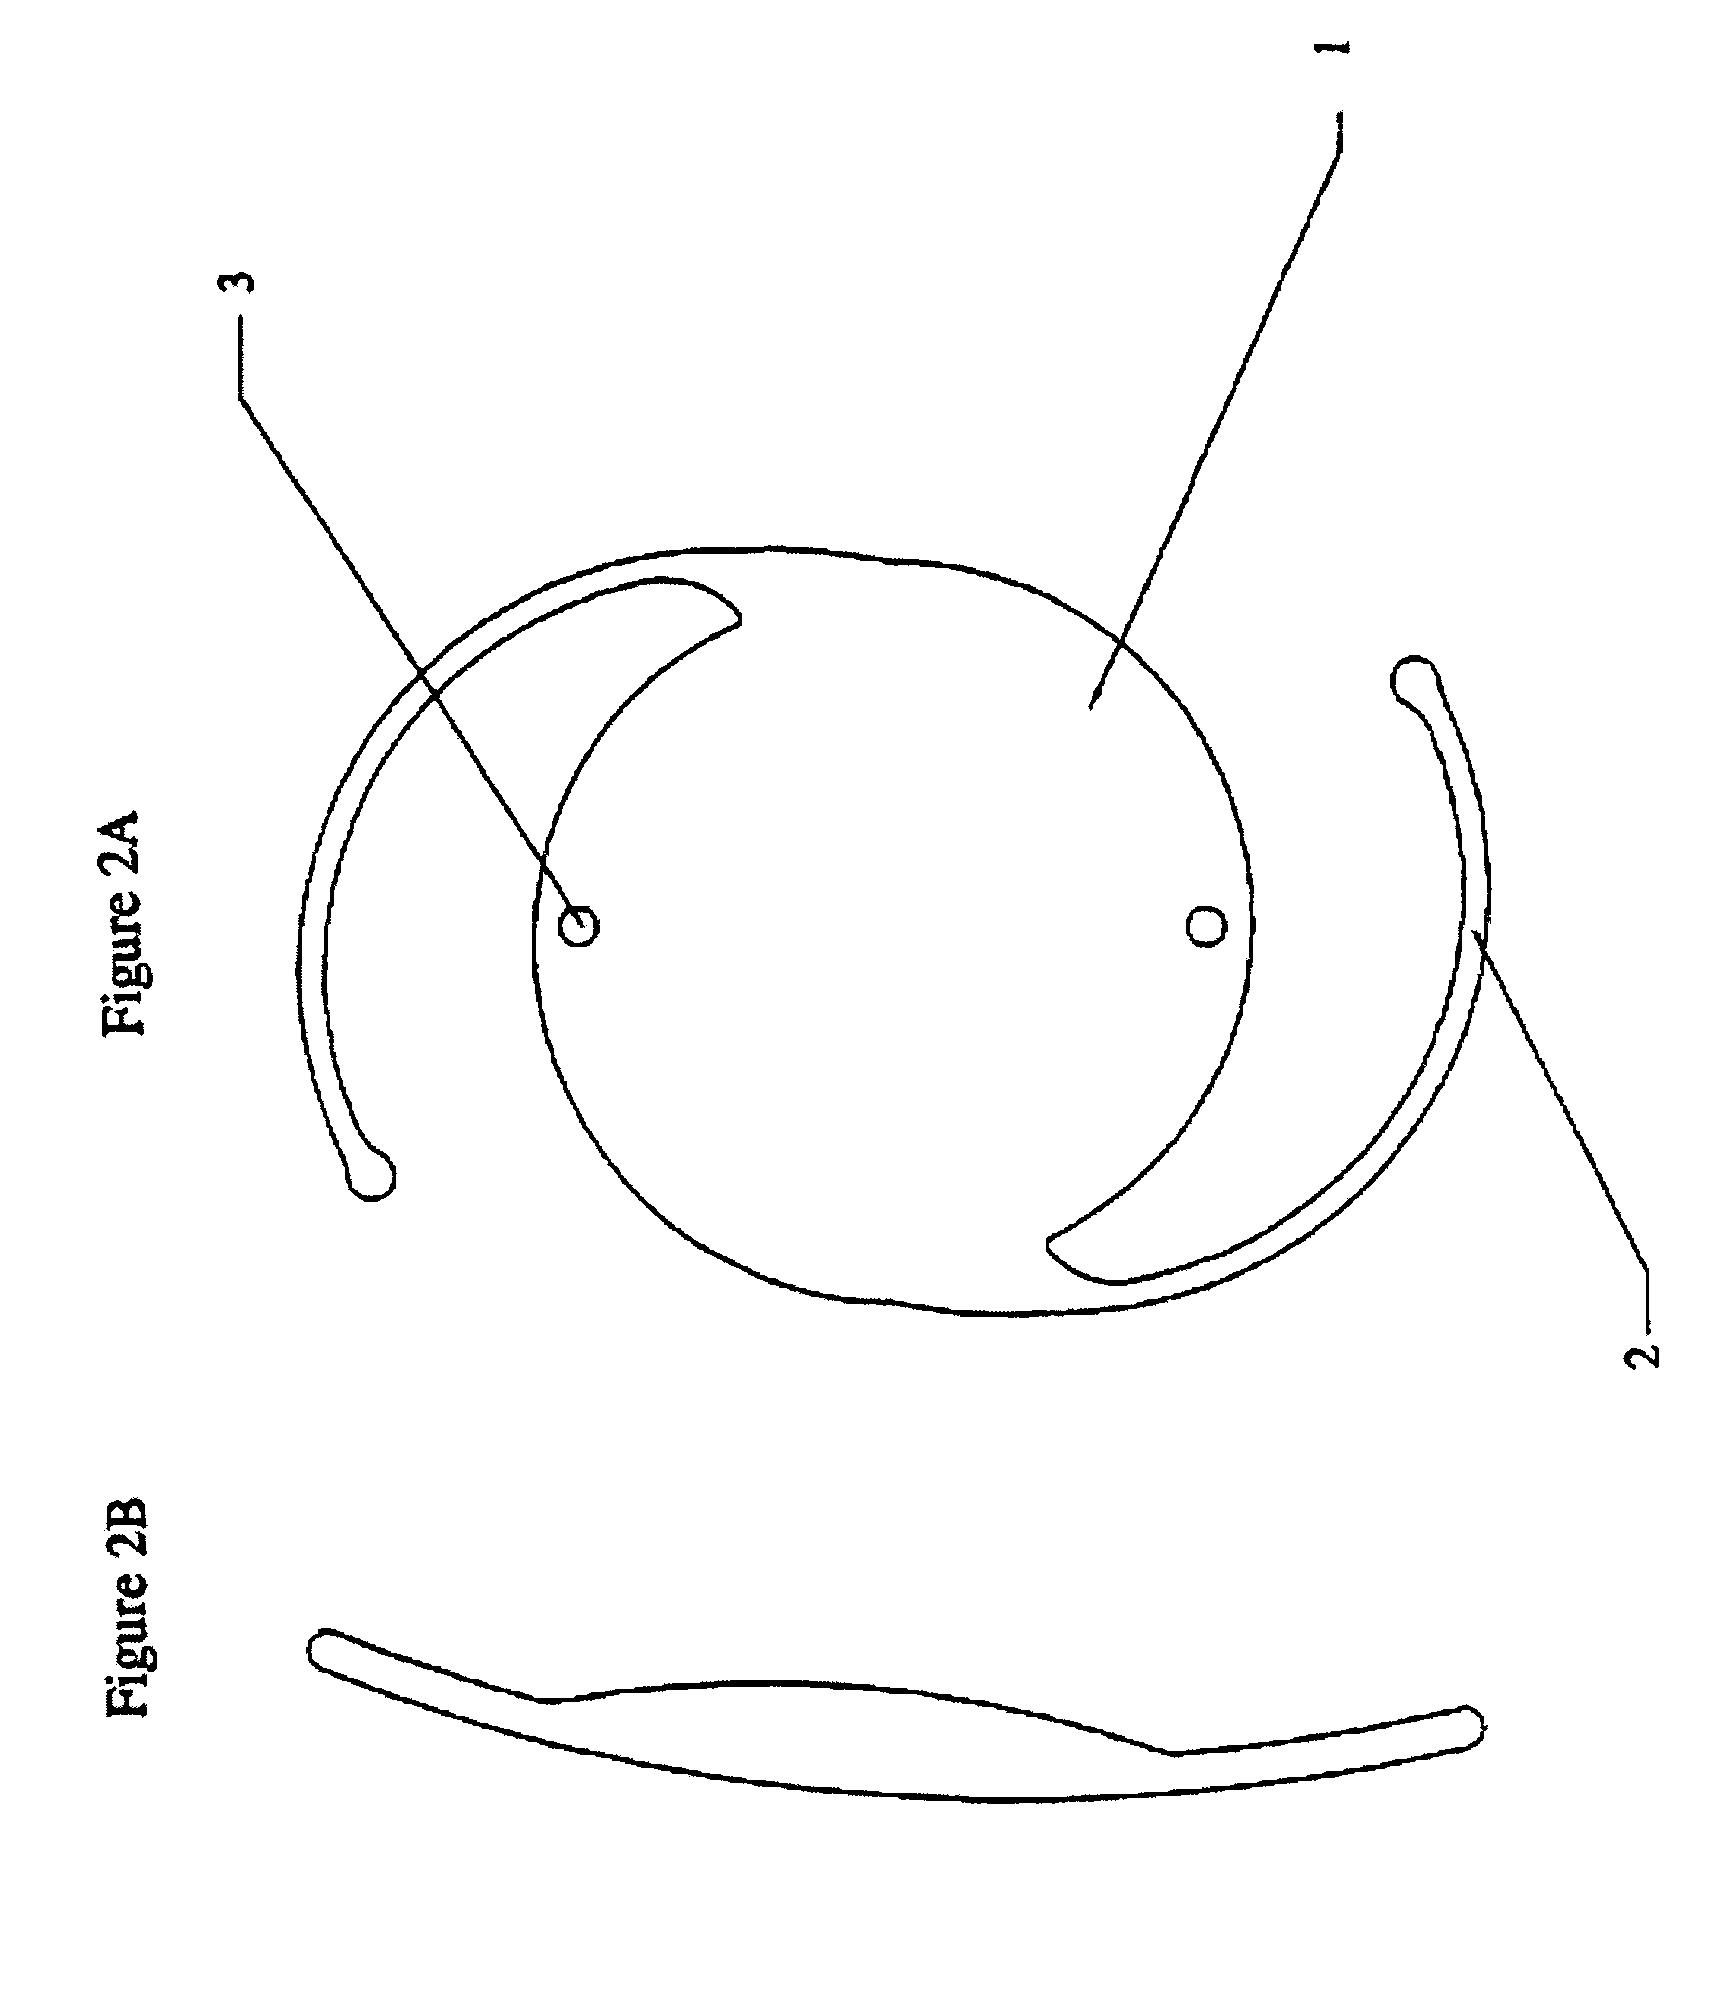 Materials for making hydrophobic intraocular lens